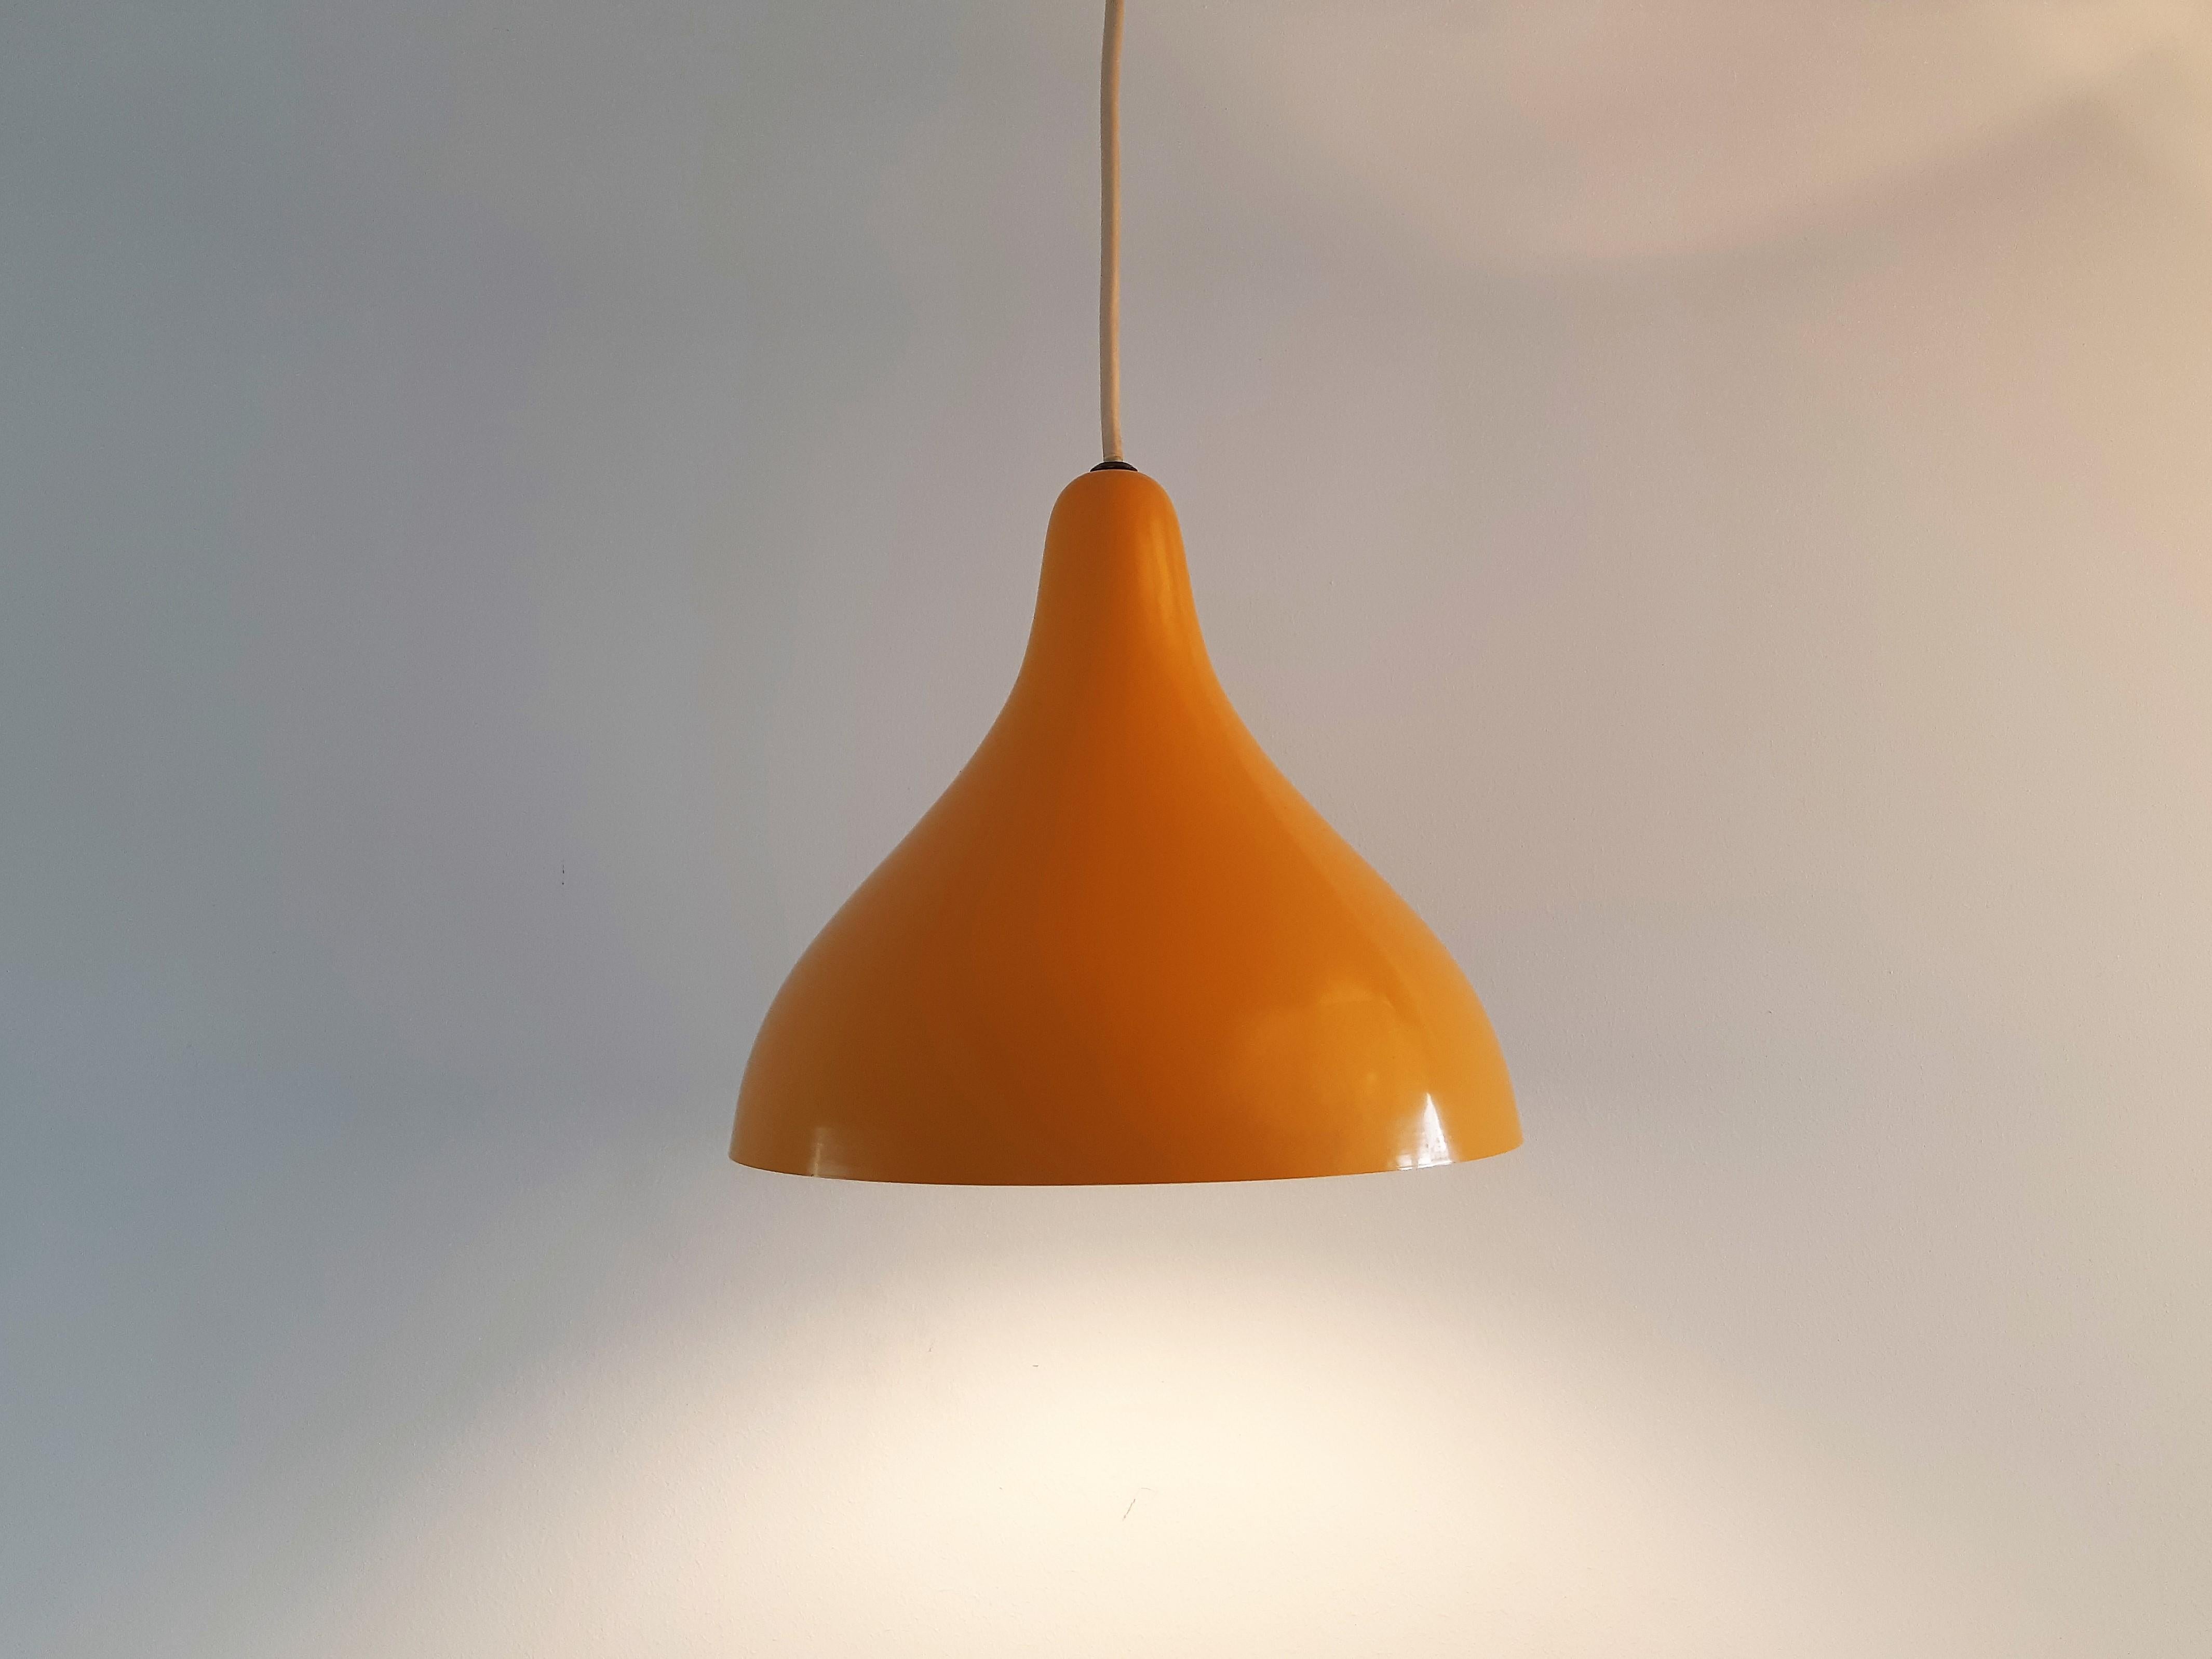 This lamp is reminiscent of the work of Lisa Johansson-Pape for lighting company Orno. It is a beautiful organic design from the early 50's, with exactly the same details of Pape's work, also with how the sockets are attached to the fixtures.